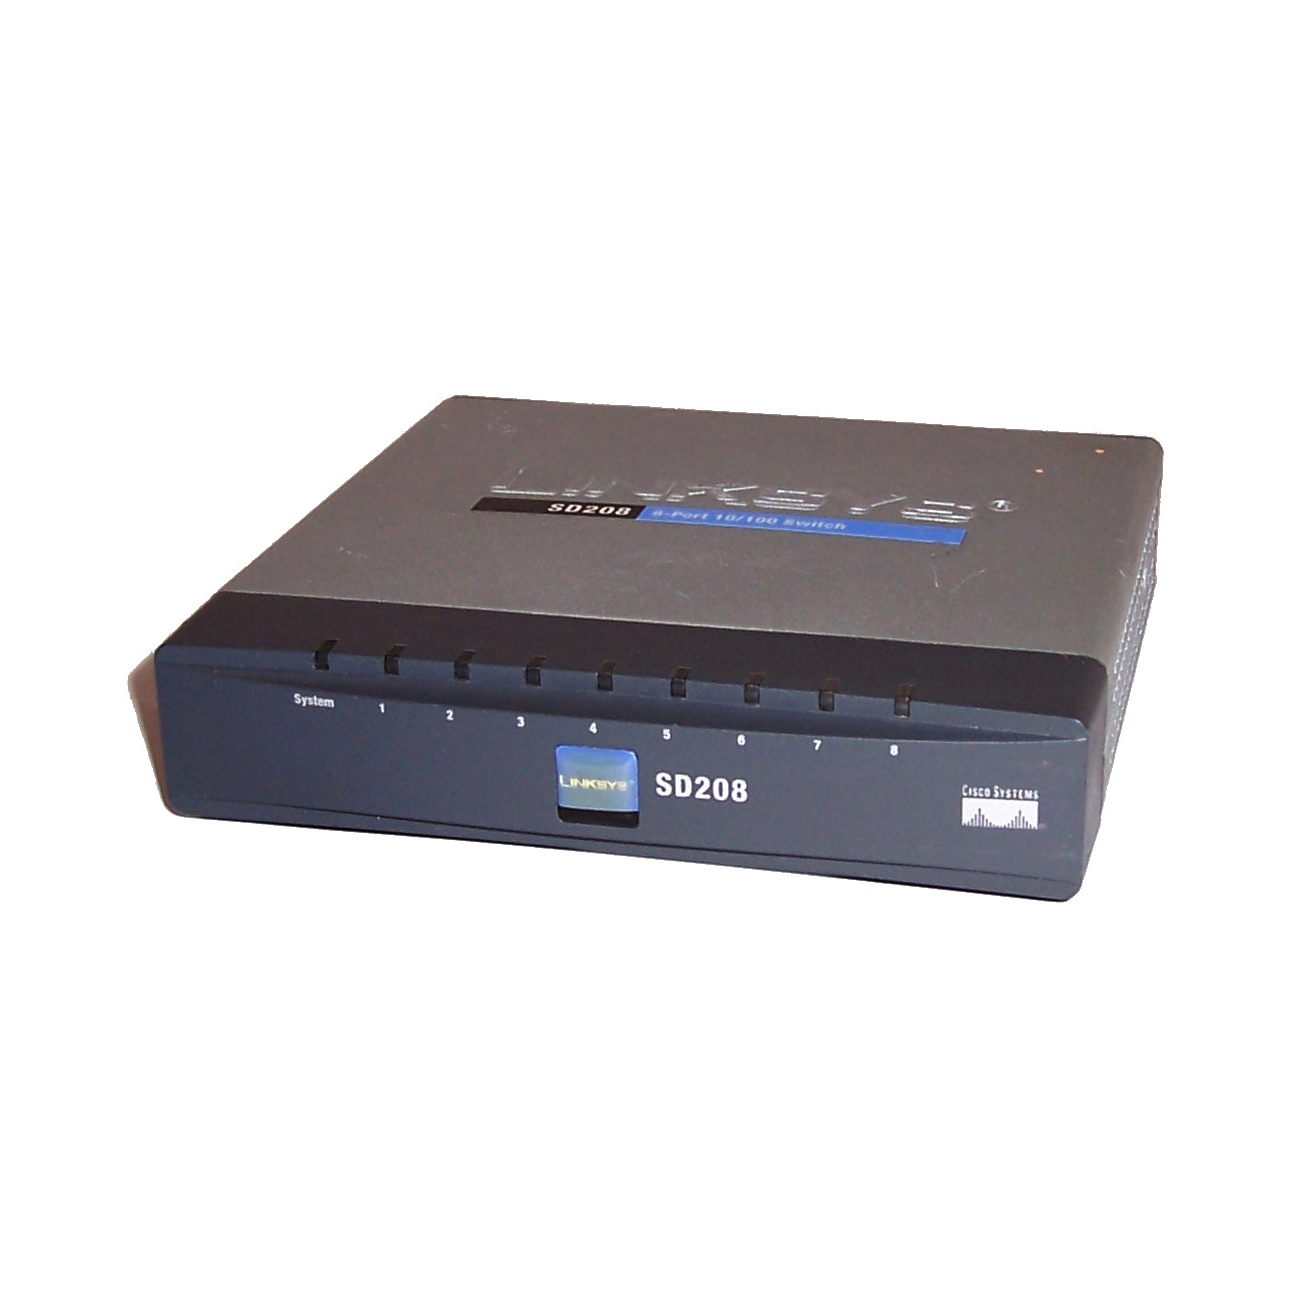 HUB 10/100MB SWITCH 8 PORT LINKSYS SD208 مستعمل ,Other Used Items